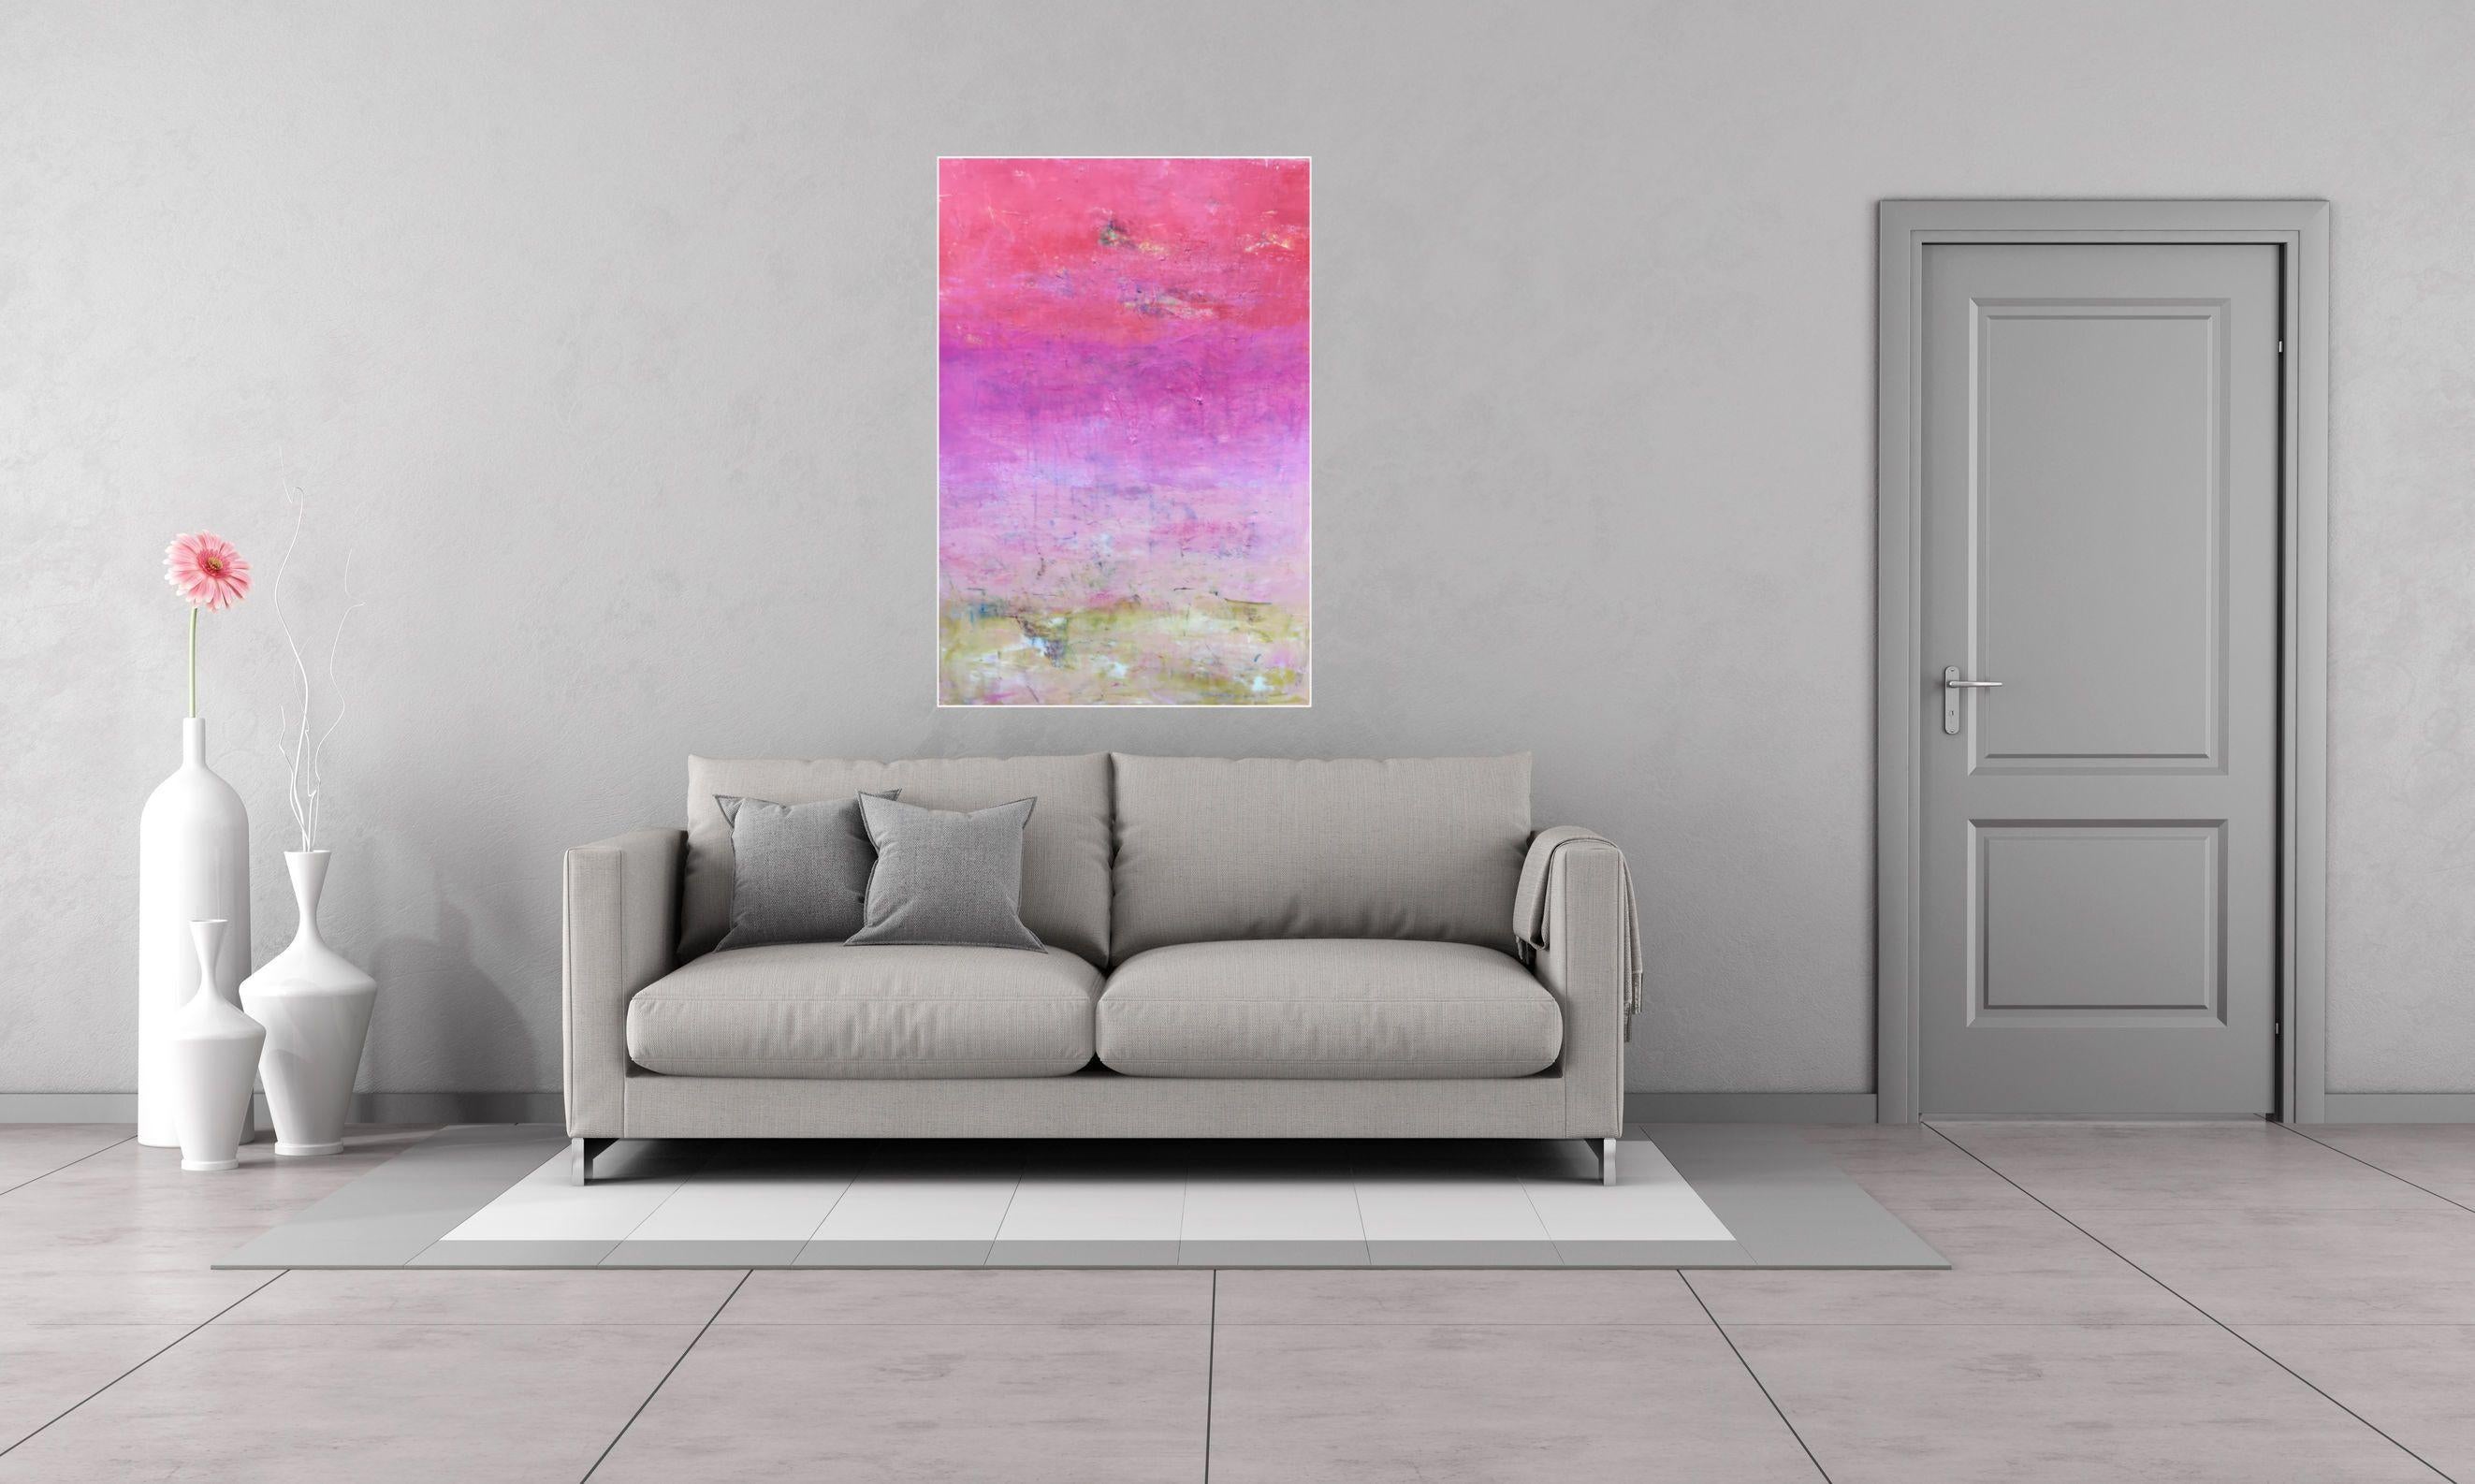 An abstract landscape painting inspired by watching the sun set from my living room window. Oil paint has been applied, taken off and re-applied in many layers to slowly build the painting and add depth to it. Vibrant rose, pink, yellow and white